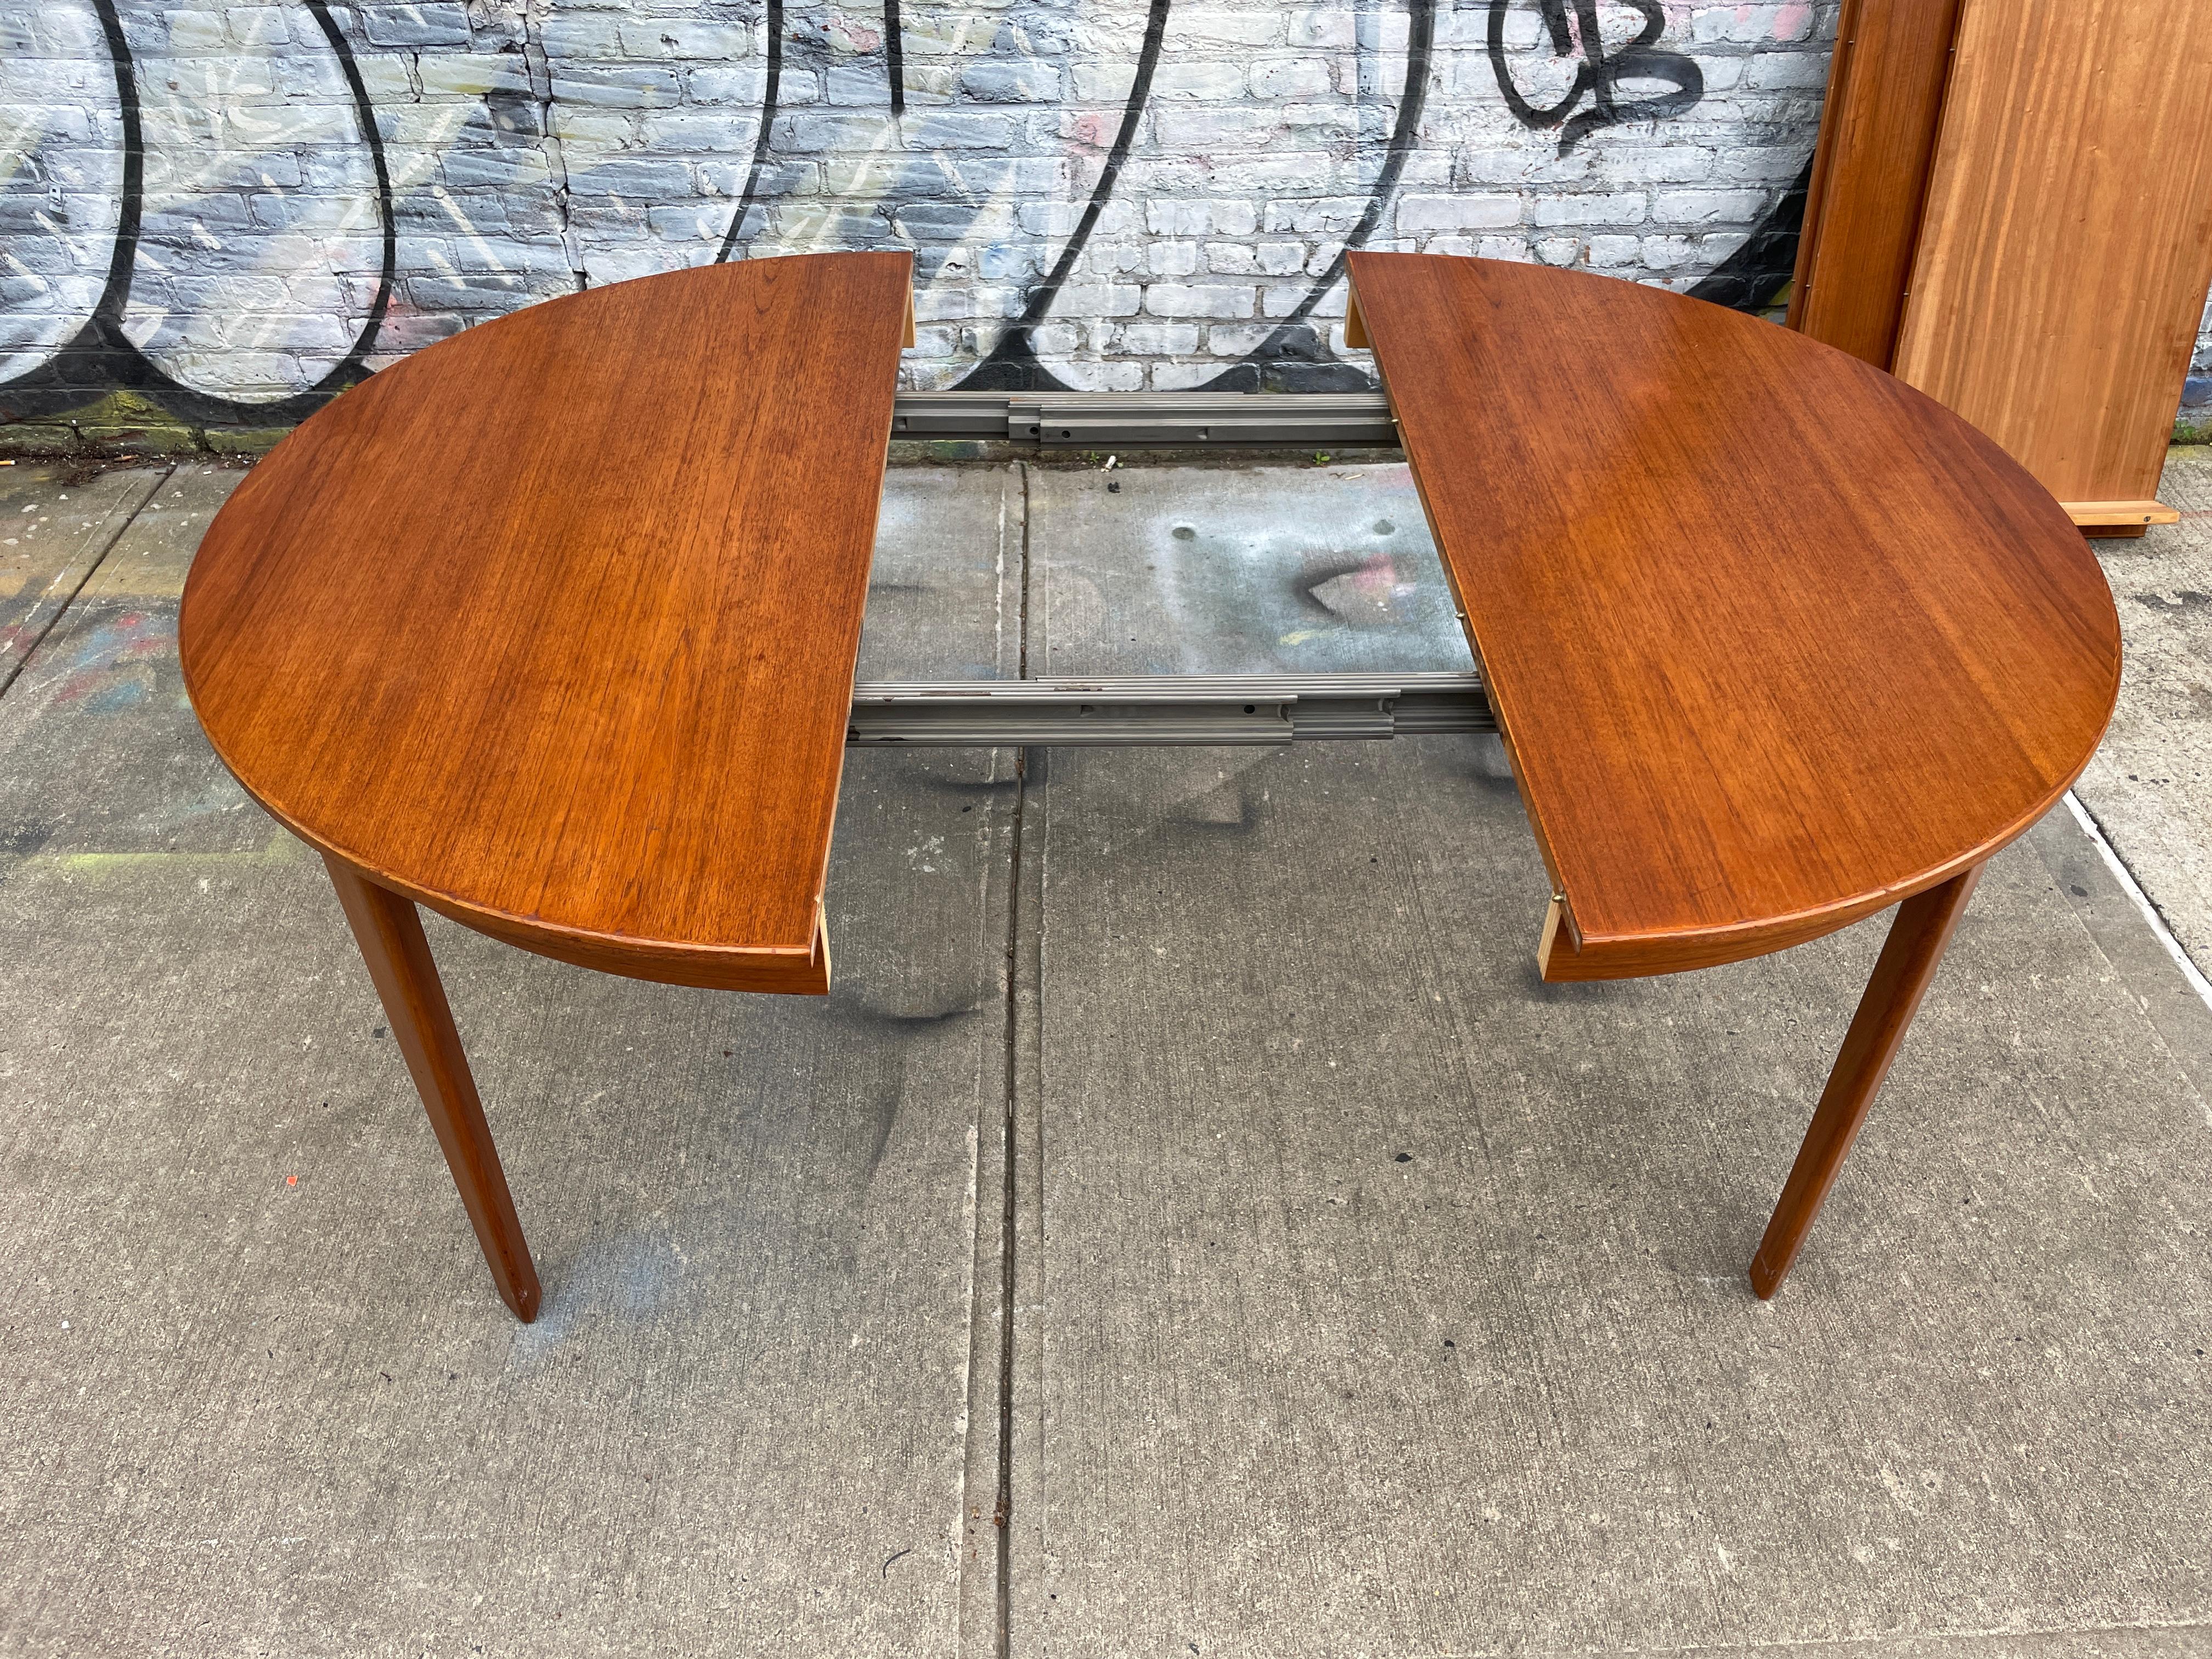 Mid-20th Century Midcentury Round Light Teak Danish Modern Extension Dining Table 3 Leaves For Sale